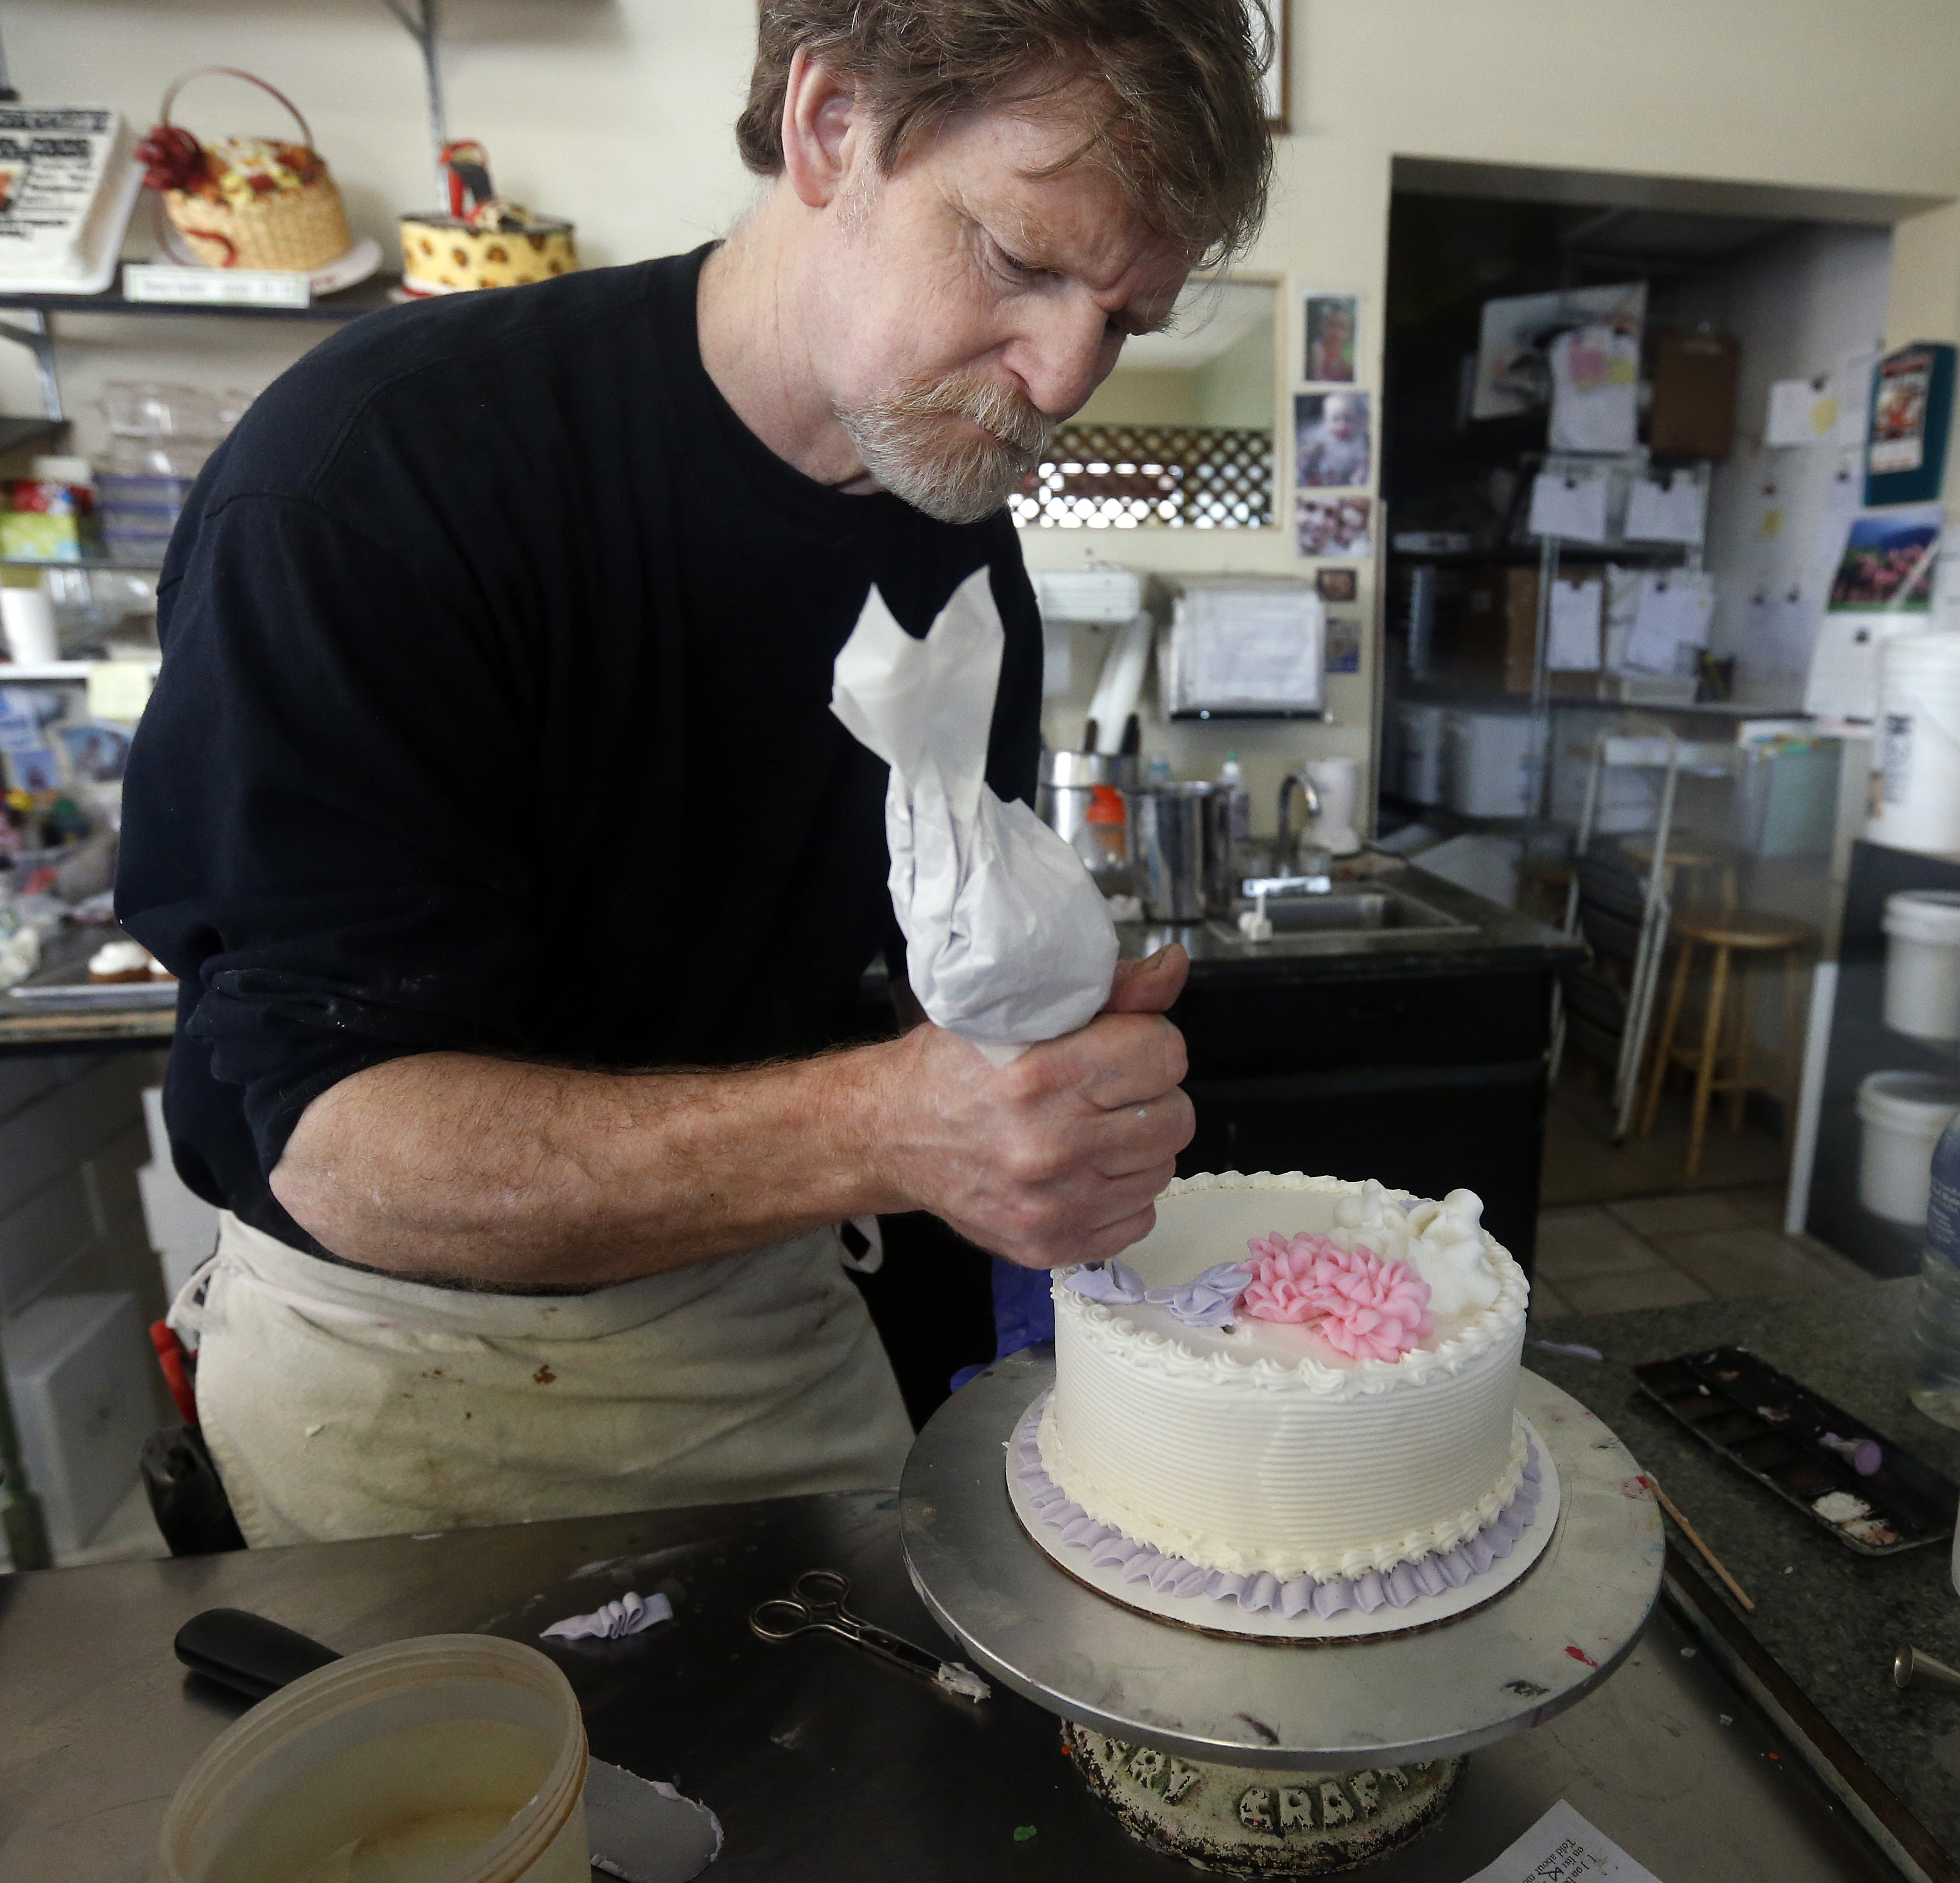 Masterpiece Cakeshop owner Jack Phillips decorates a cake inside his store, in Lakewood, Colorado, on March 14, 2010. (Brennan Linsley&mdash;AP)